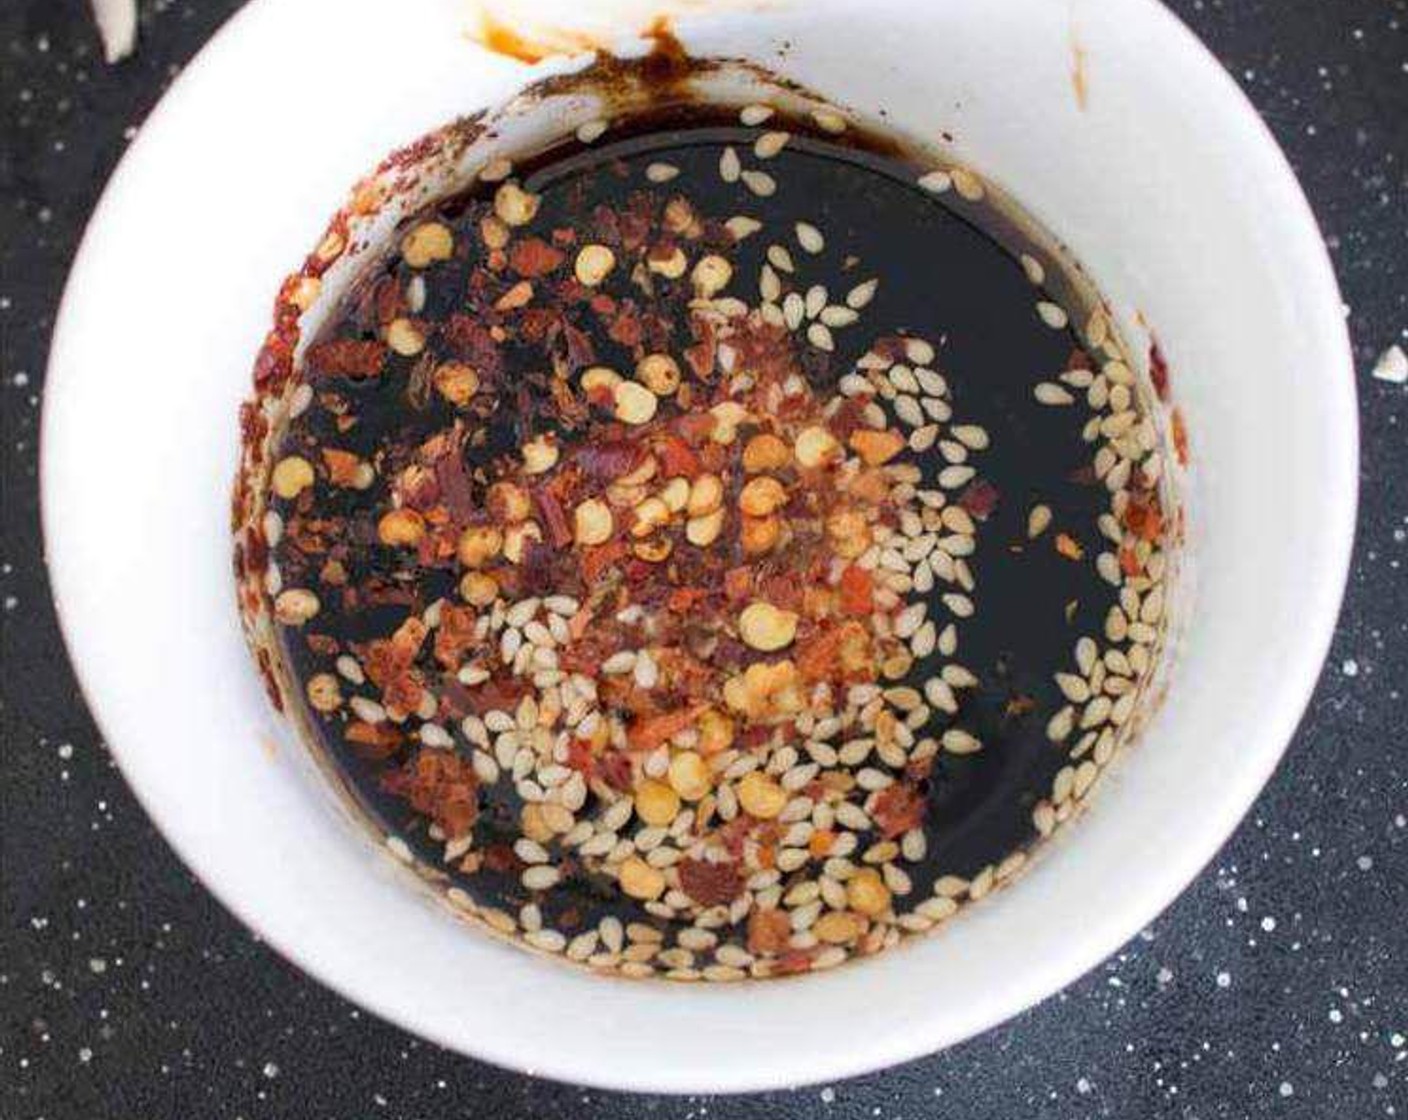 step 2 Mix the Dark Soy Sauce (1 tsp), Light Soy Sauce (2 Tbsp), Sesame Oil (1 tsp), Sesame Seeds (1 pinch), and Crushed Red Pepper Flakes (1 pinch) in a small bowl. Set aside.